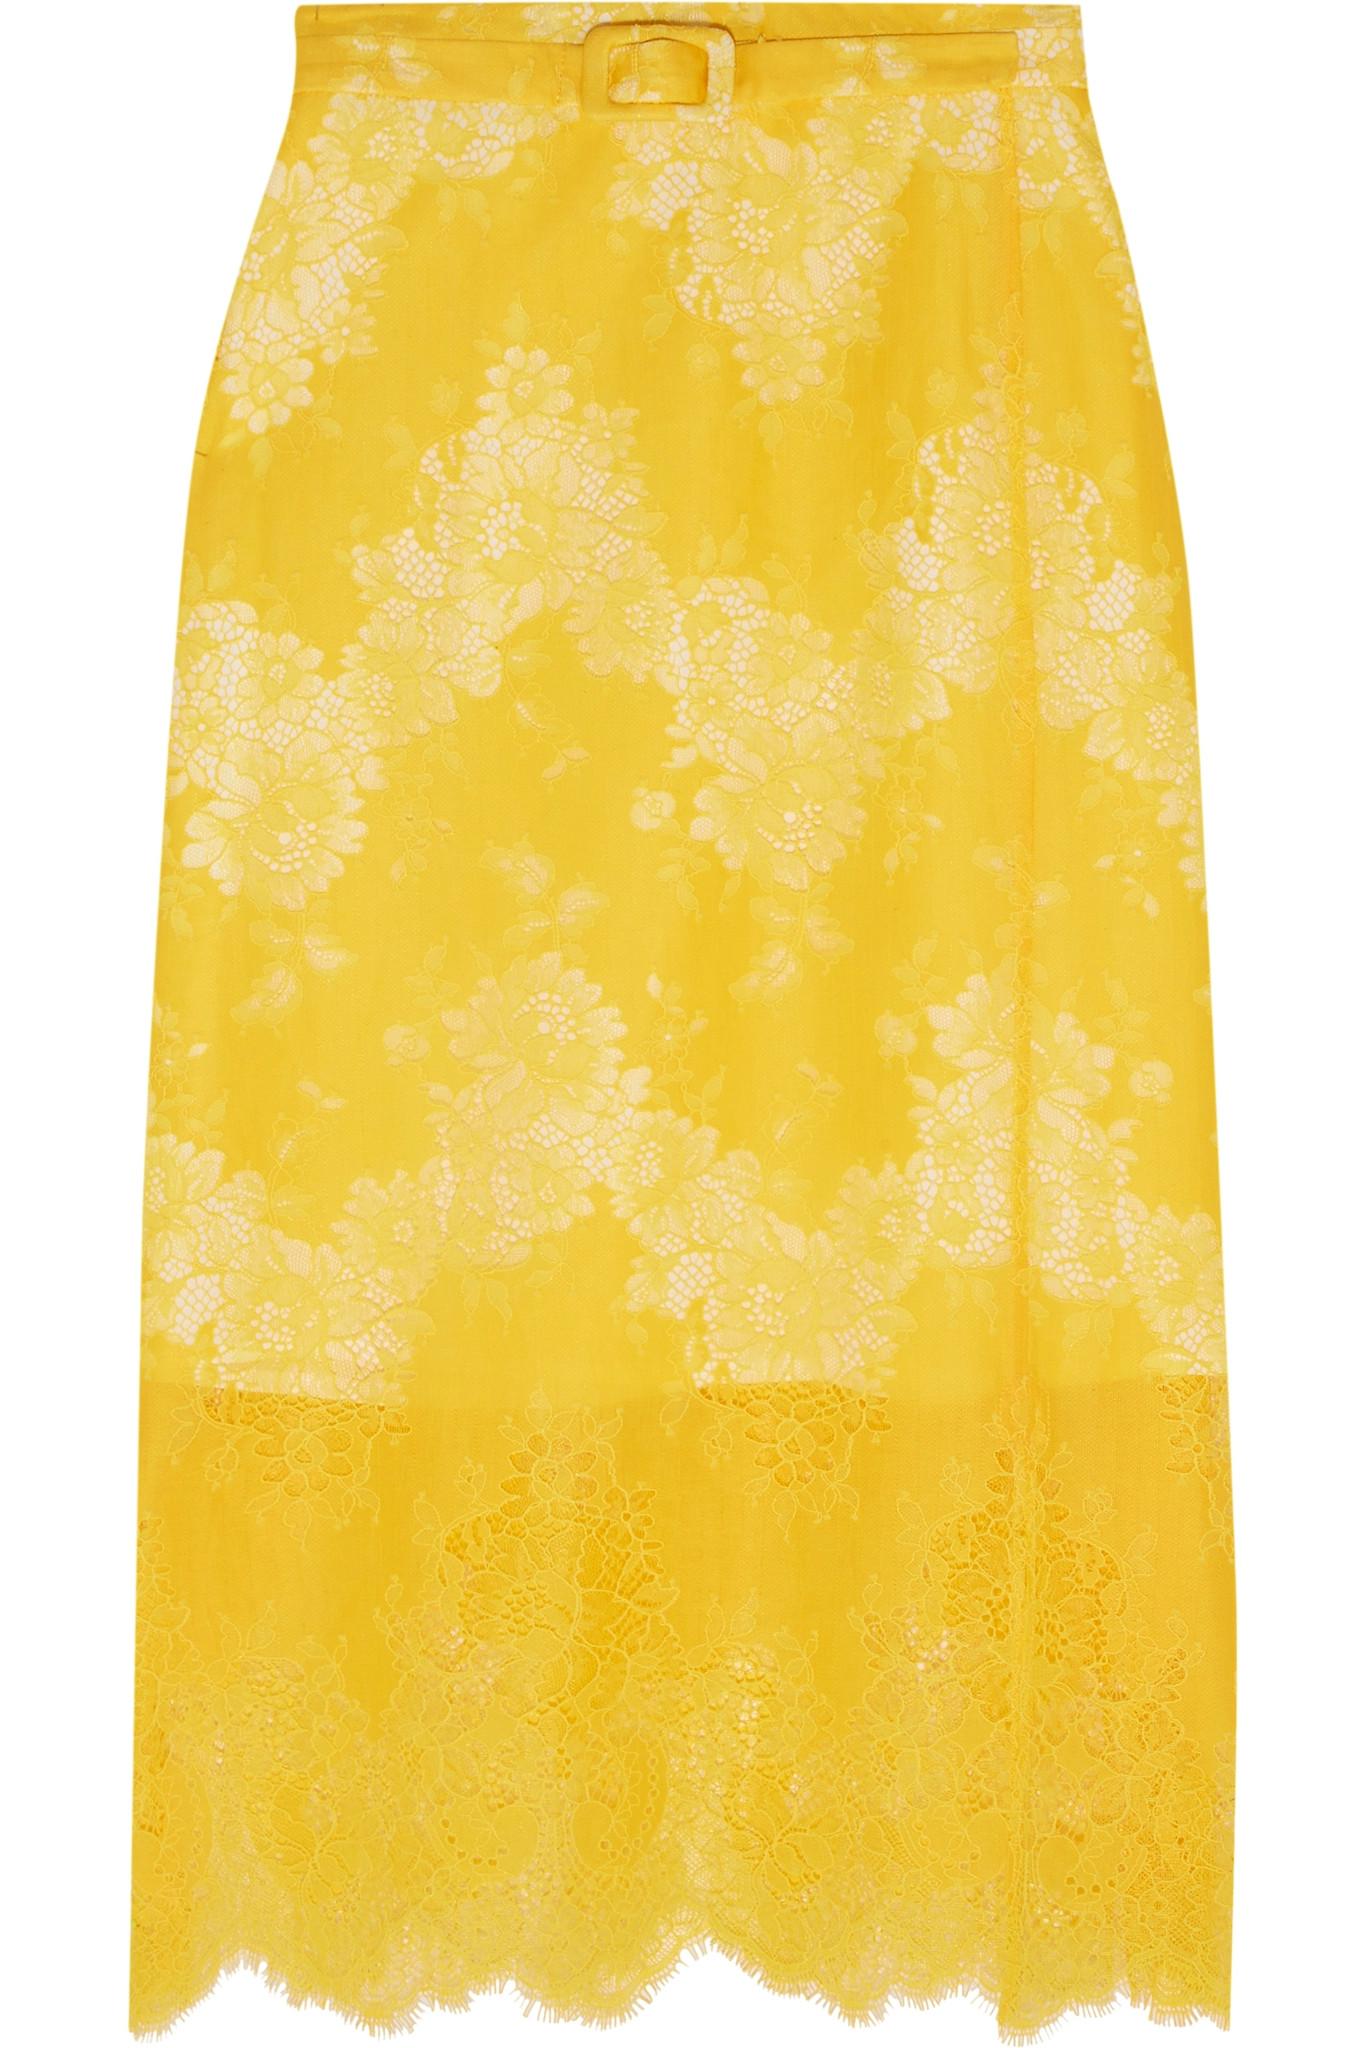 Lyst - Carven Belted Lace Skirt in Yellow - Save 53%